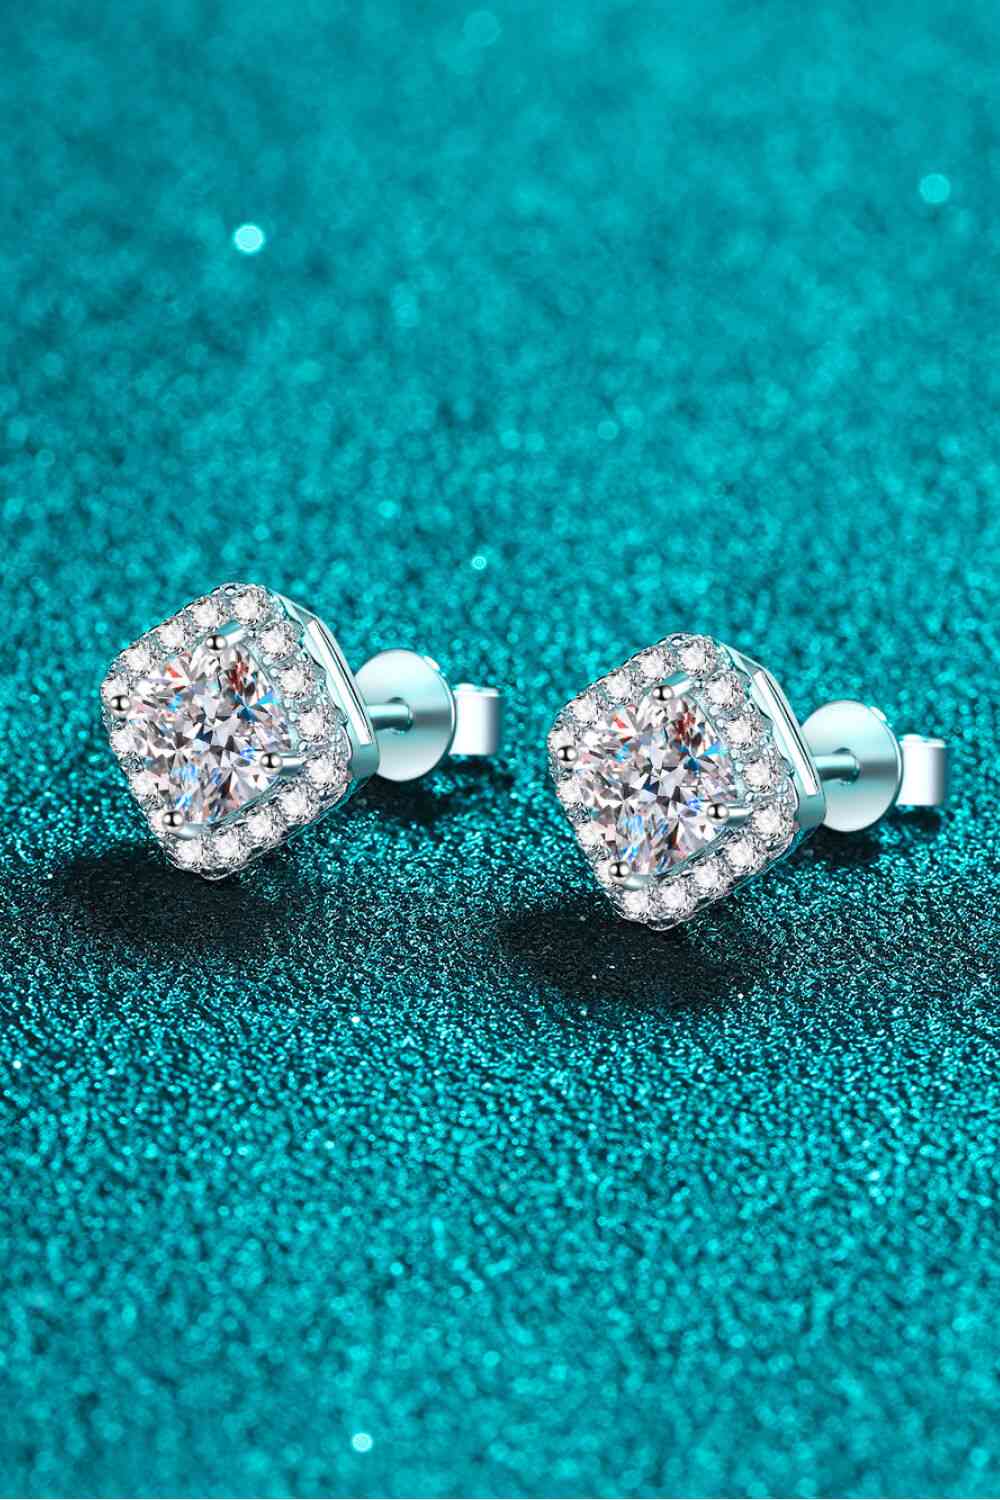 925 Sterling Silver Inlaid 2 Carat Moissanite Square Stud Earrings - lolaluxeshop